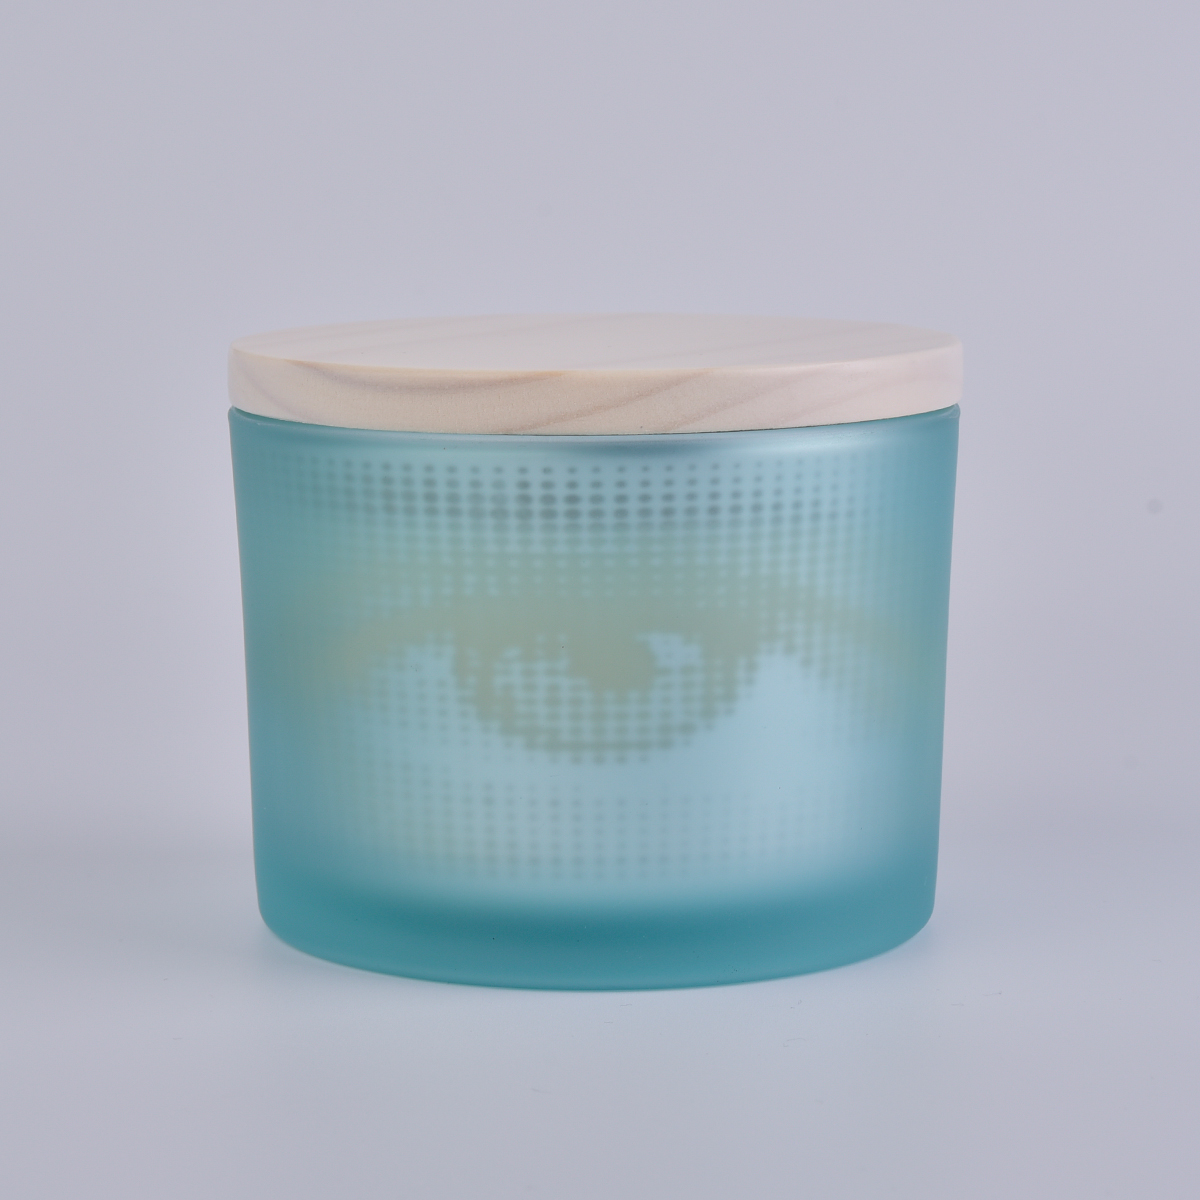 14 oz frosted blue glass jar with laser pattern, fancy glass candle holders